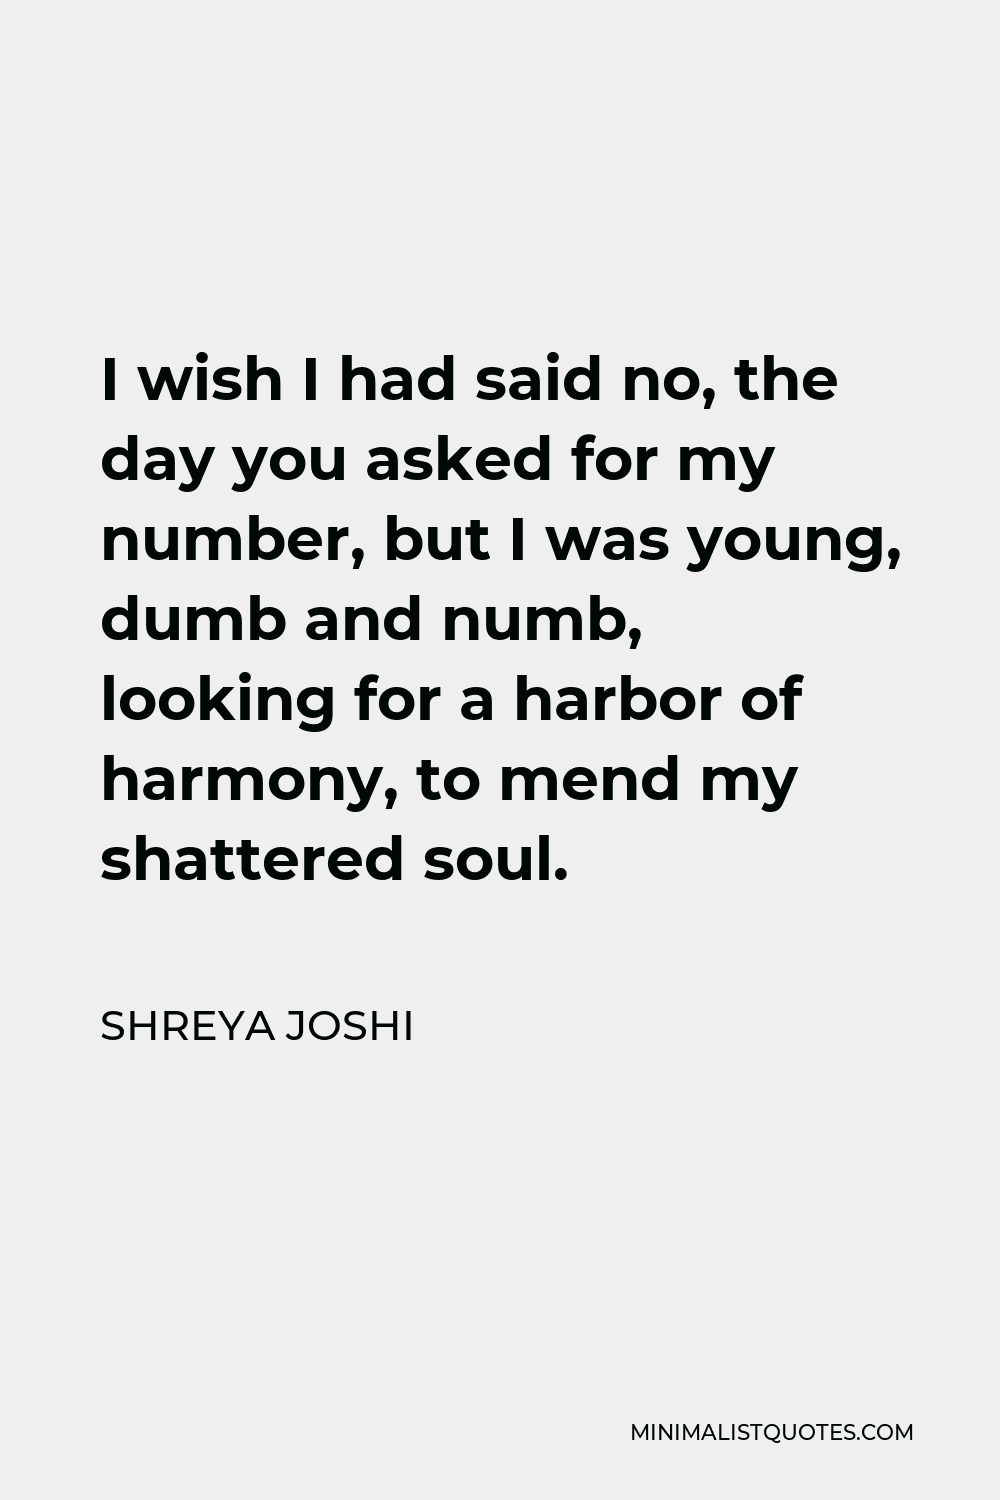 Shreya Joshi Quote - I wish I had said no, the day you asked for my number, but I was young, dumb and numb, looking for a harbor of harmony, to mend my shattered soul.